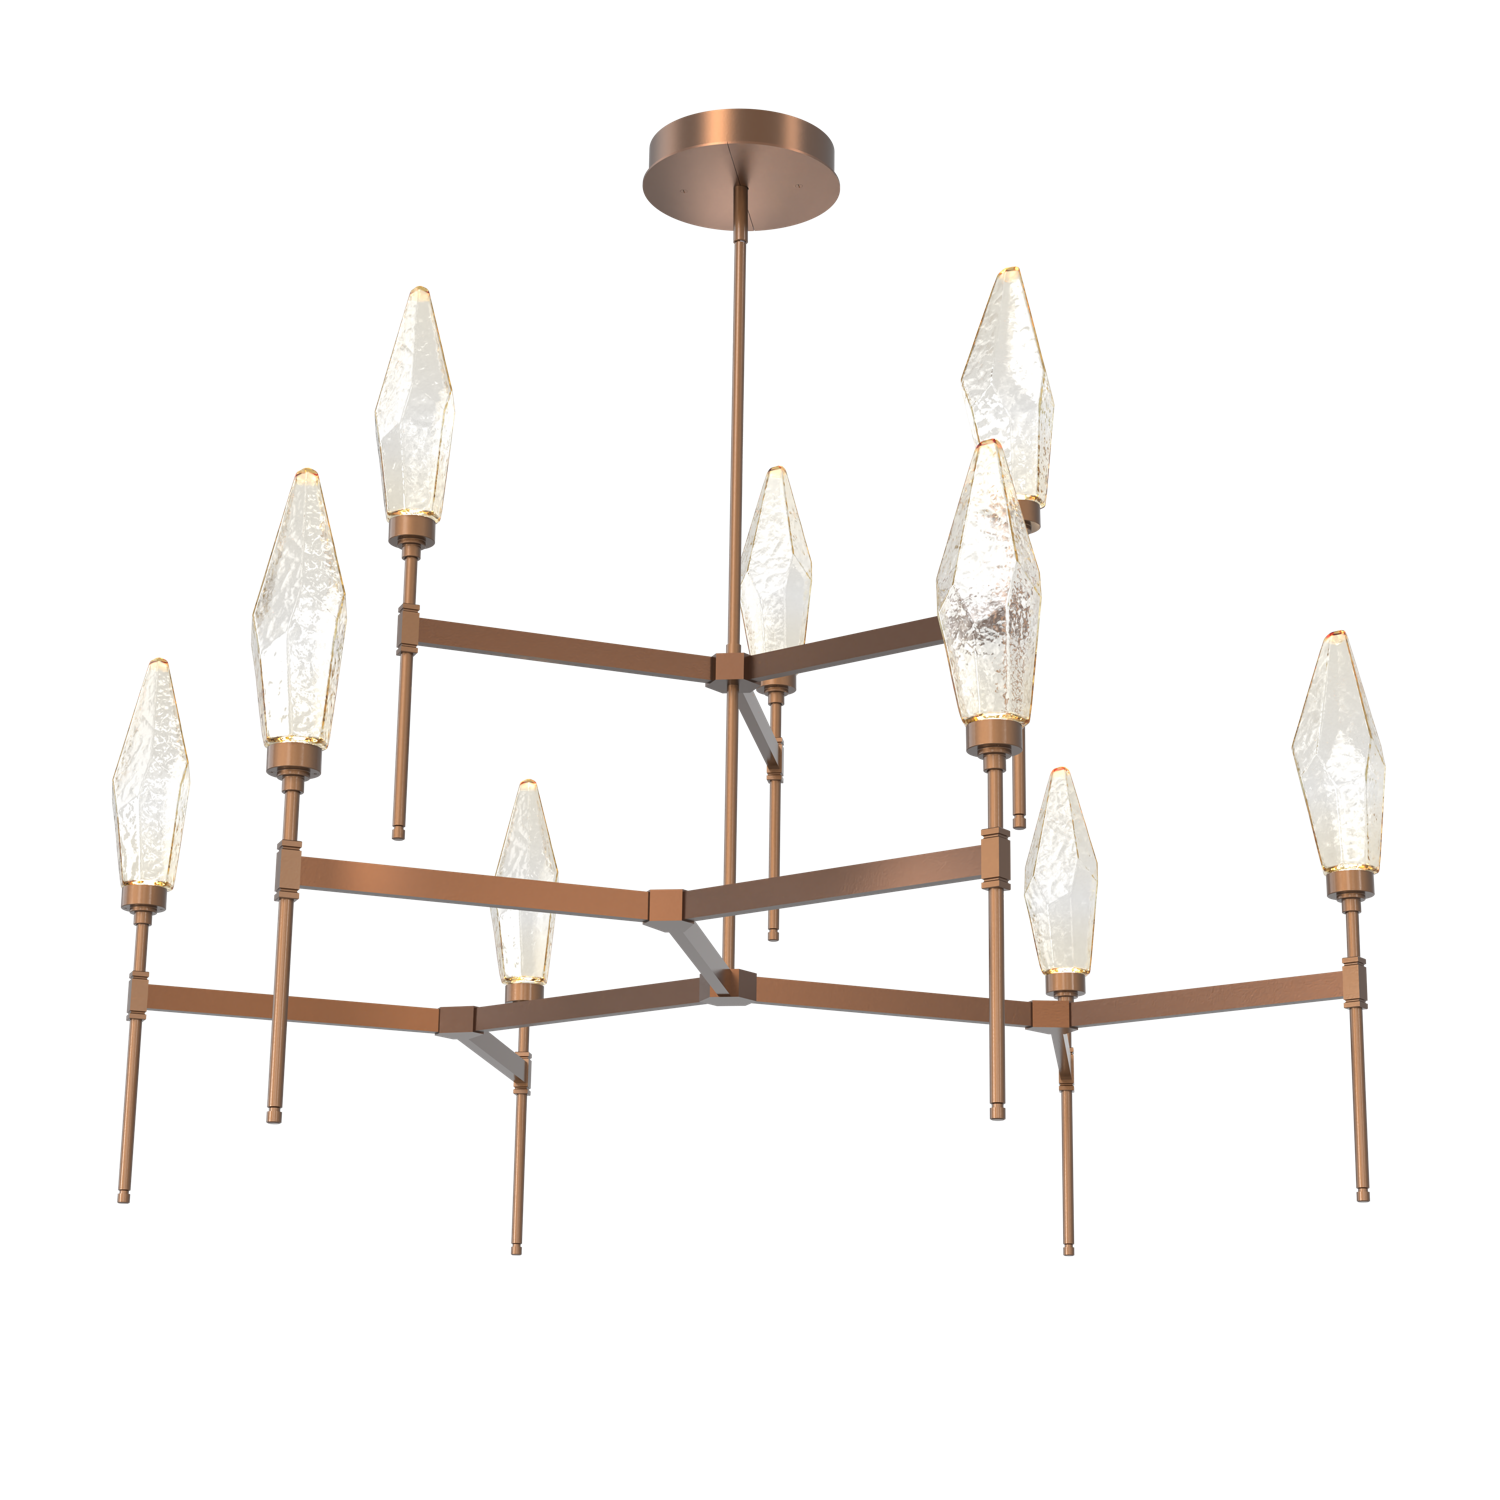 CHB0050-54-BB-CA-Hammerton-Studio-Rock-Crystal-54-inch-round-two-tier-belvedere-chandelier-with-burnished-bronze-finish-and-chilled-amber-blown-glass-shades-and-LED-lamping